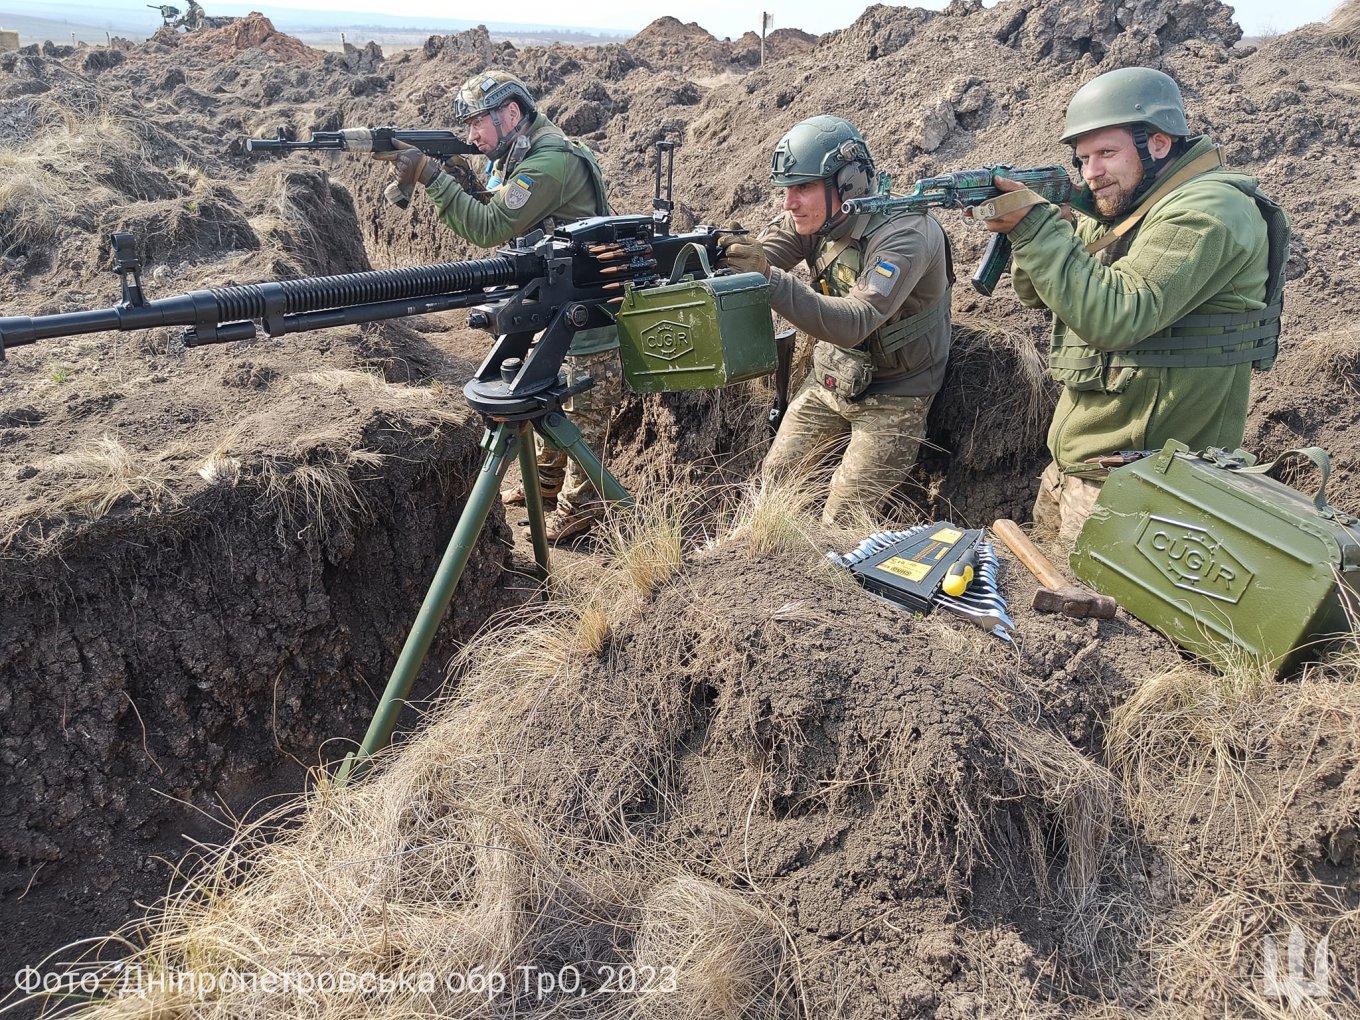 Mostly civilians before the russian invasion, soldiers of the Territorial Defense now fight alongside the Land Forces